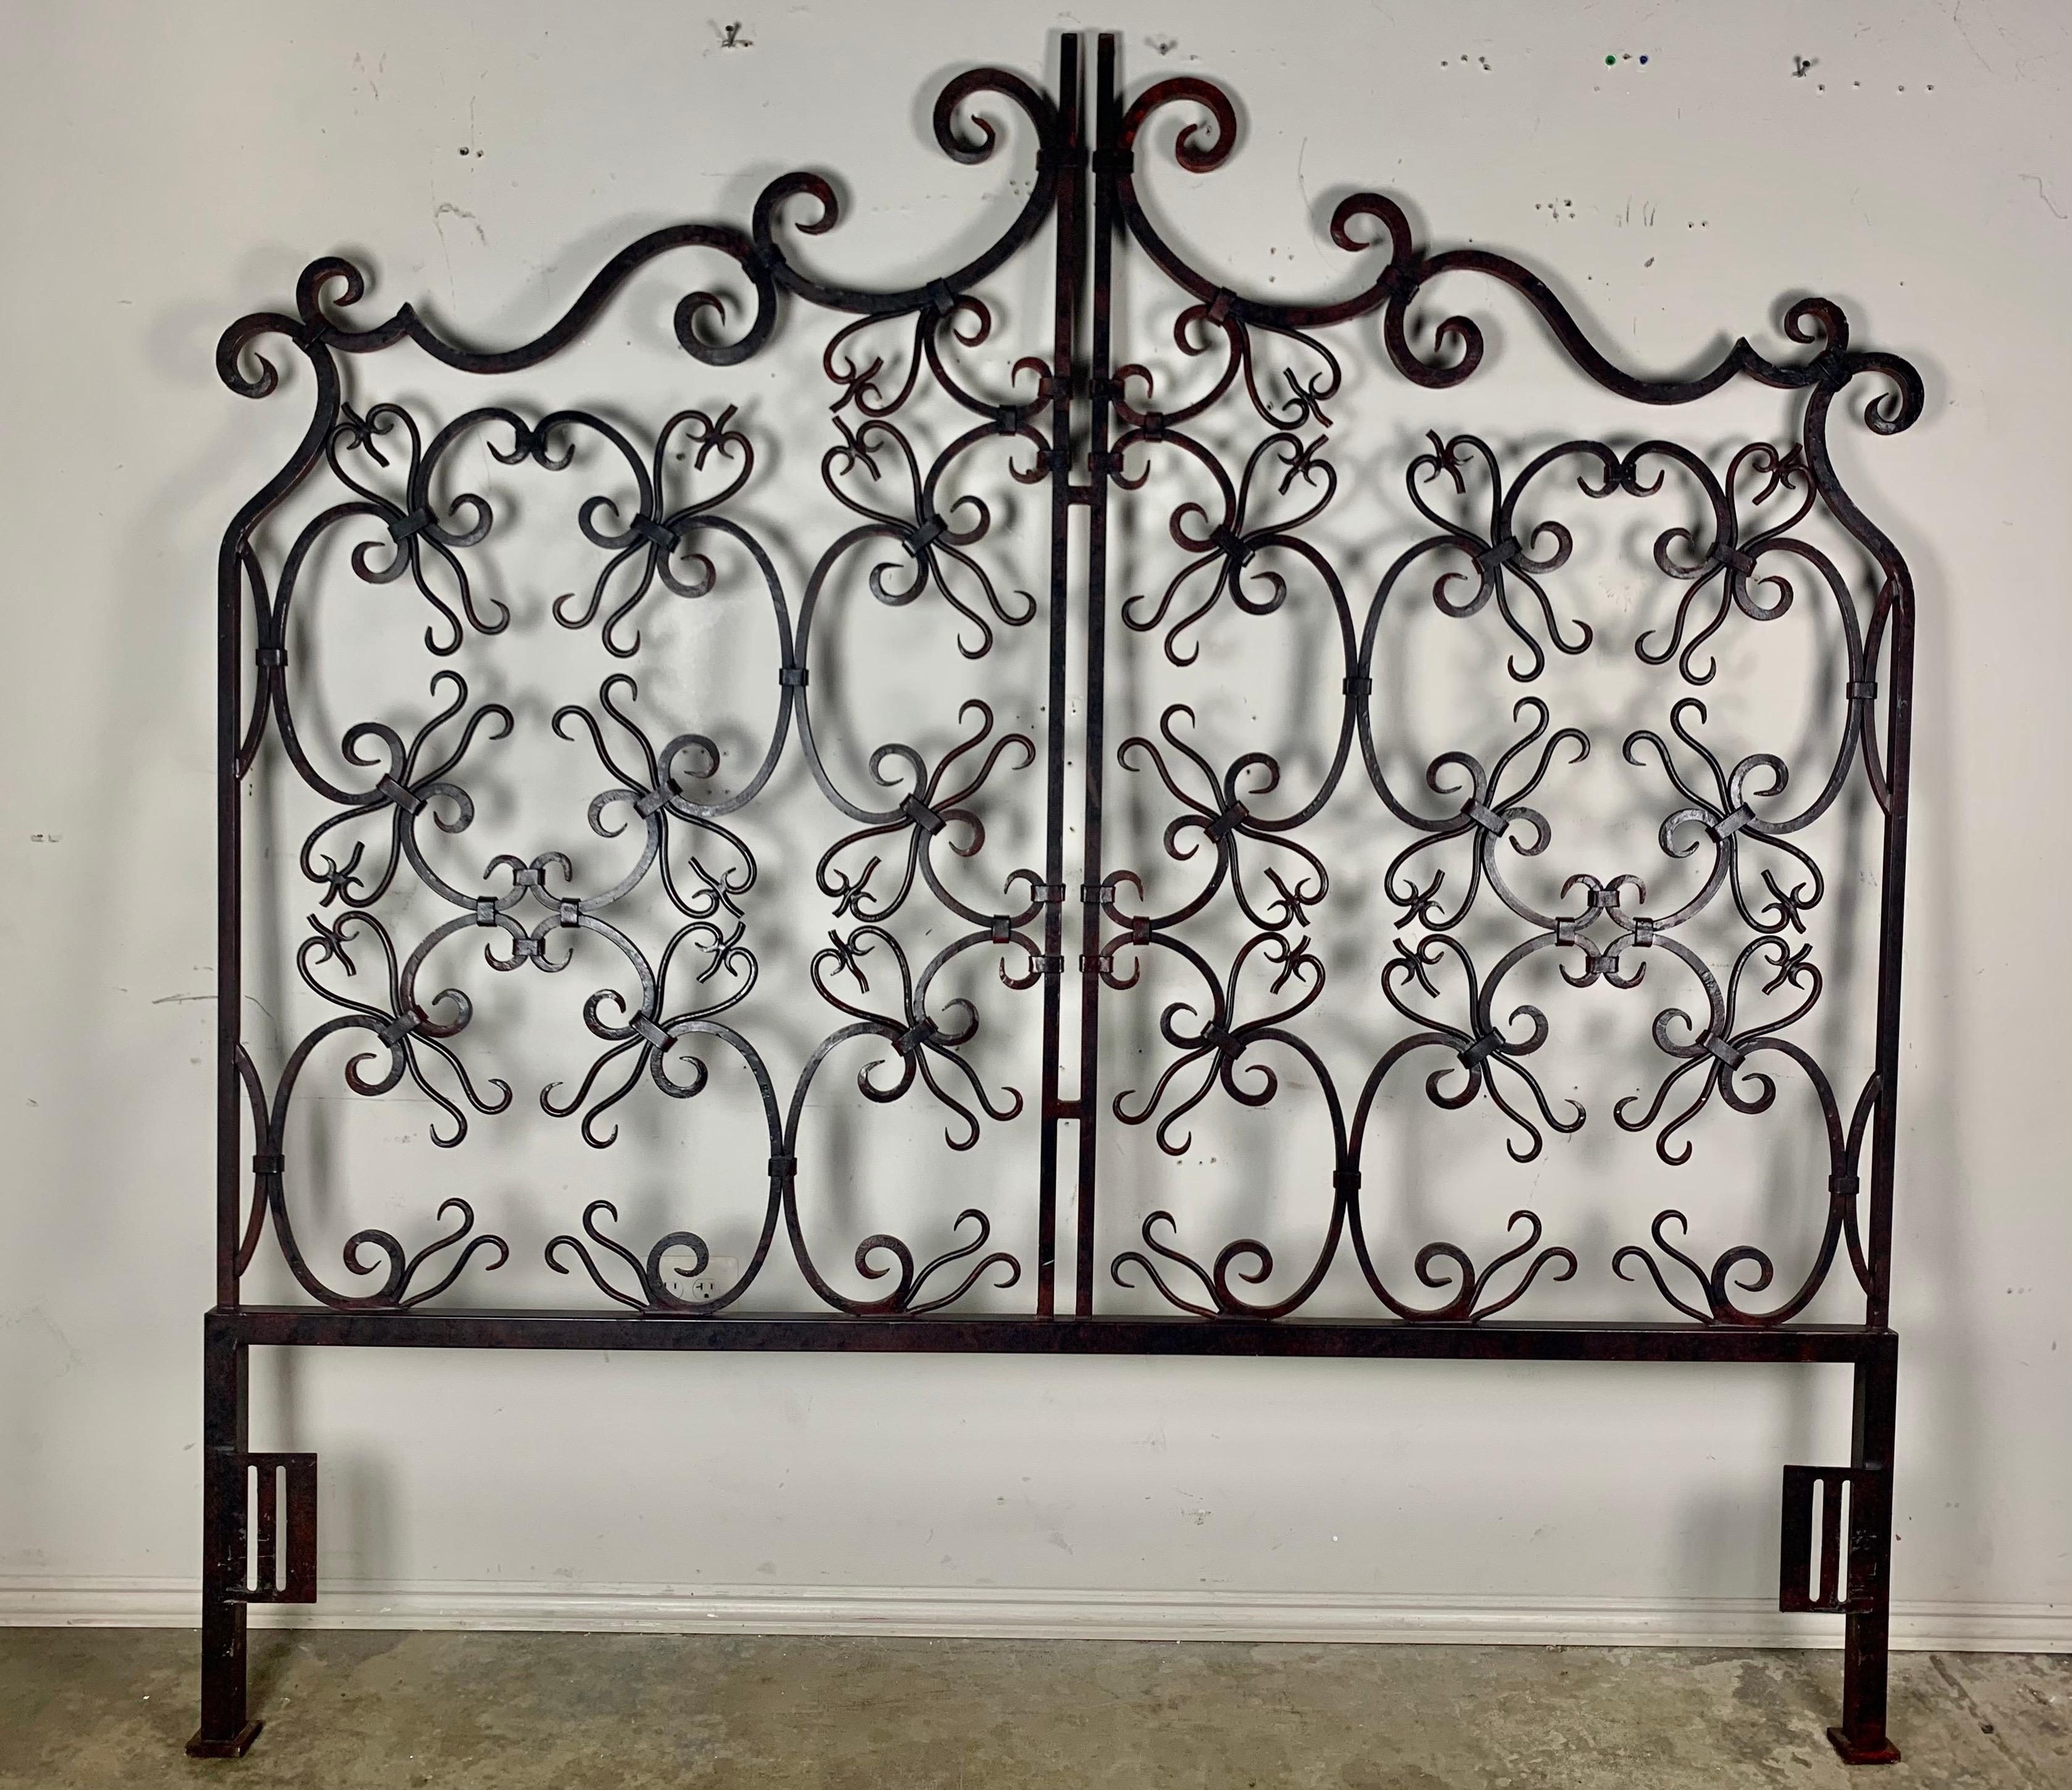 Monumental Spanish hand wrought iron king size headboard with beautiful scrolled patterns throughout. The iron has developed a beautiful patina over the years.